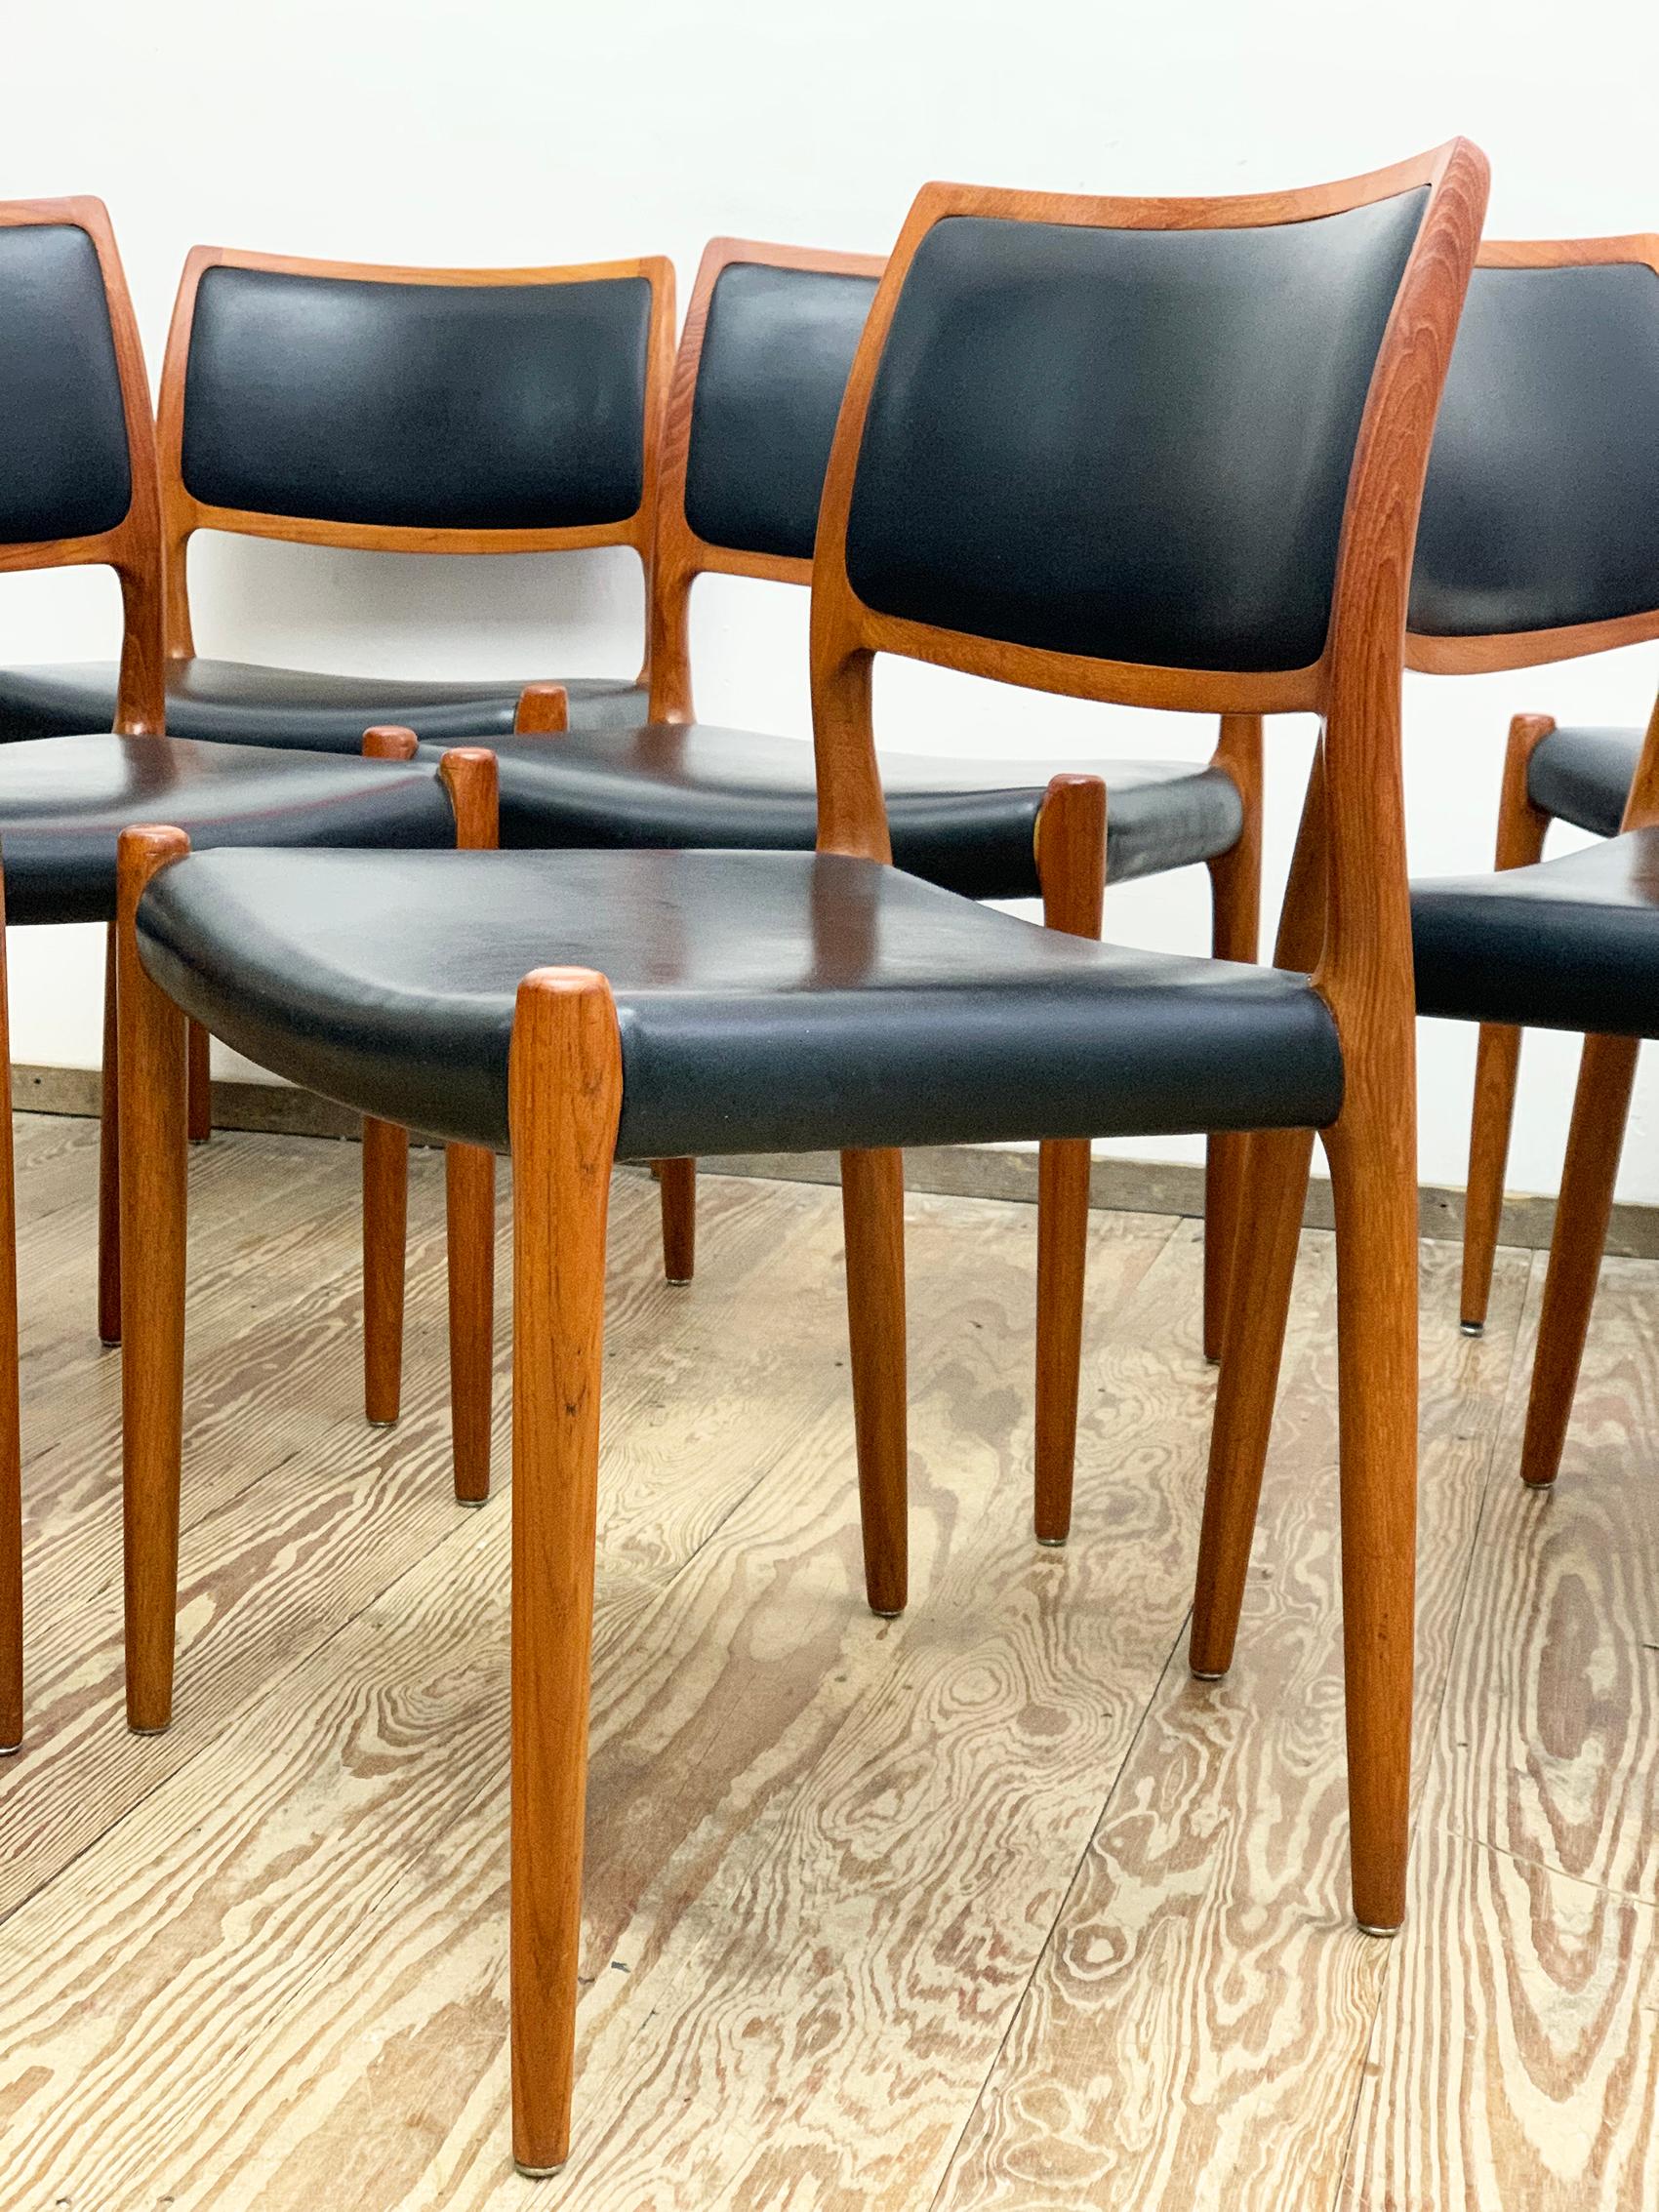 Midcentury Teak Dining Chairs #80 by Niels O. Møller for J. L. Moller, Set of 8 In Good Condition For Sale In München, Bavaria